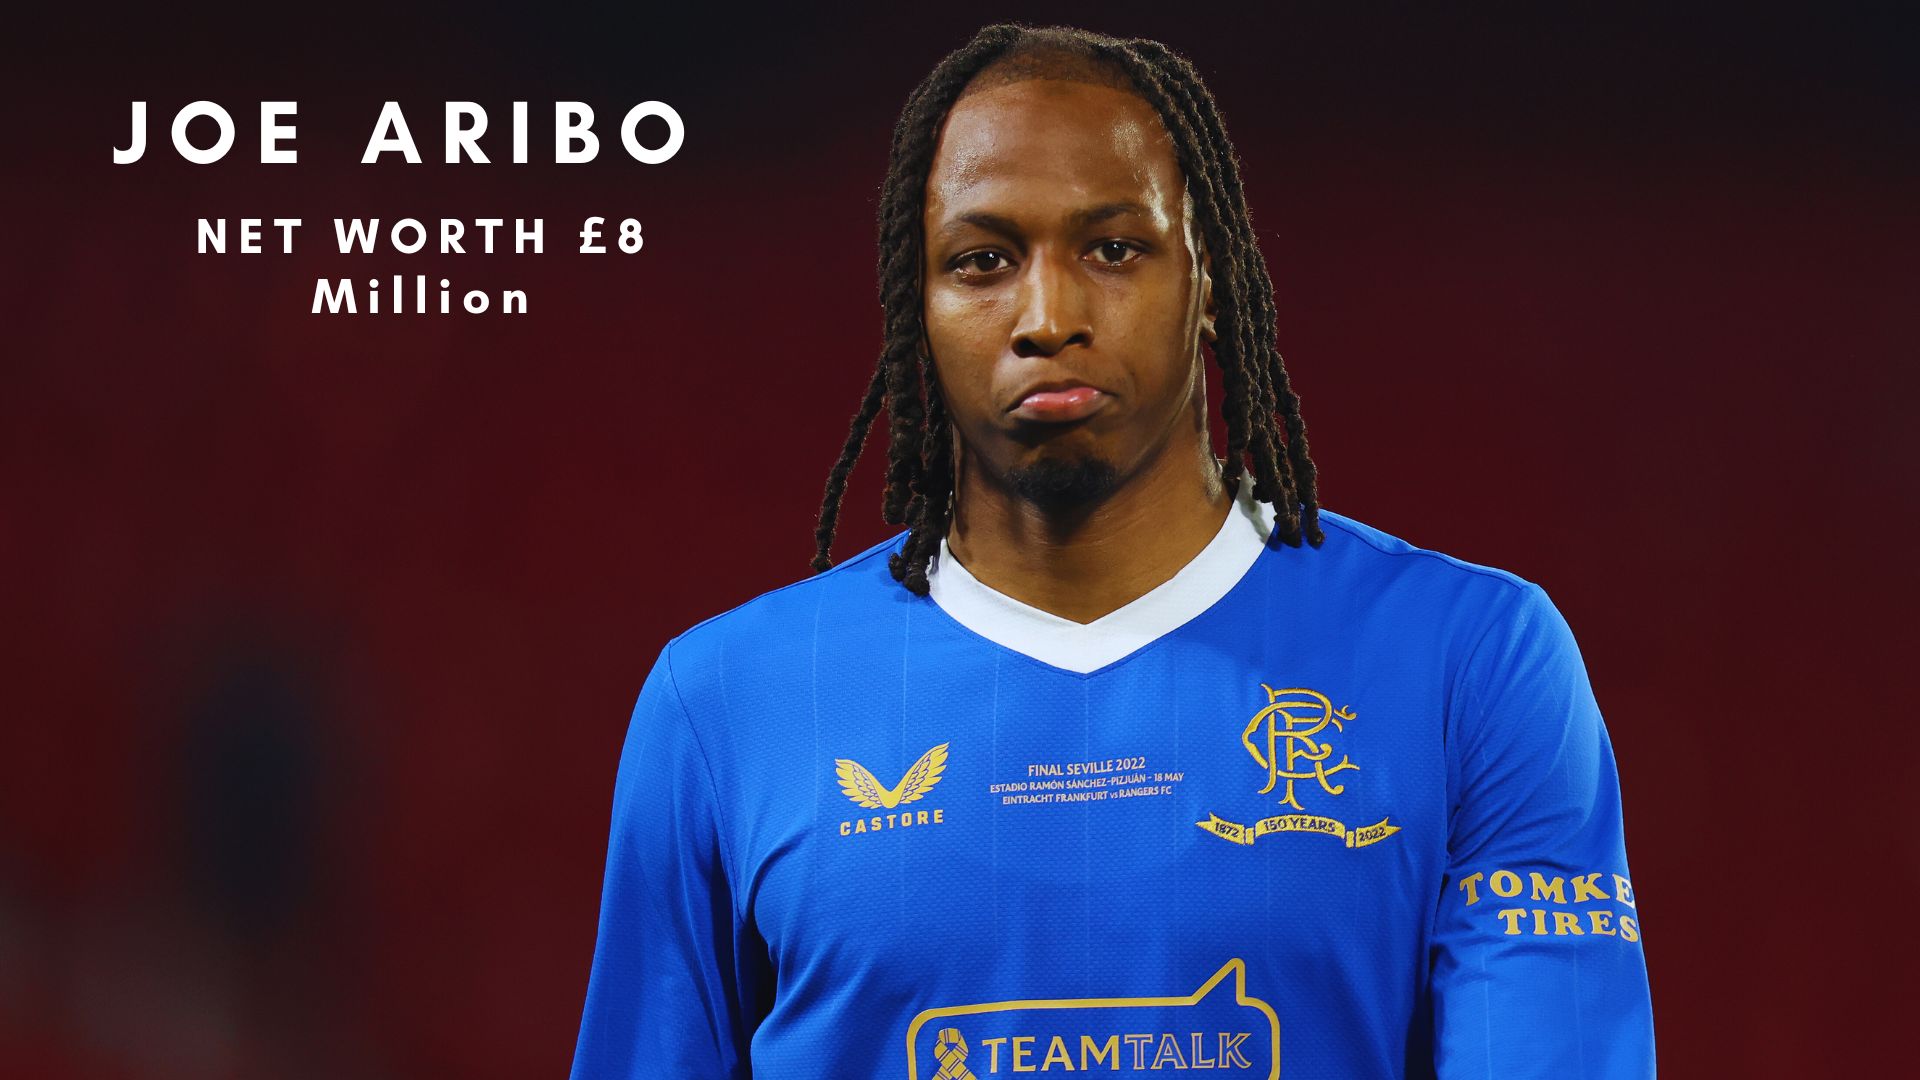 Joe Aribo has a net worth of £8 Million. (Photo by Justin Setterfield/Getty Images)